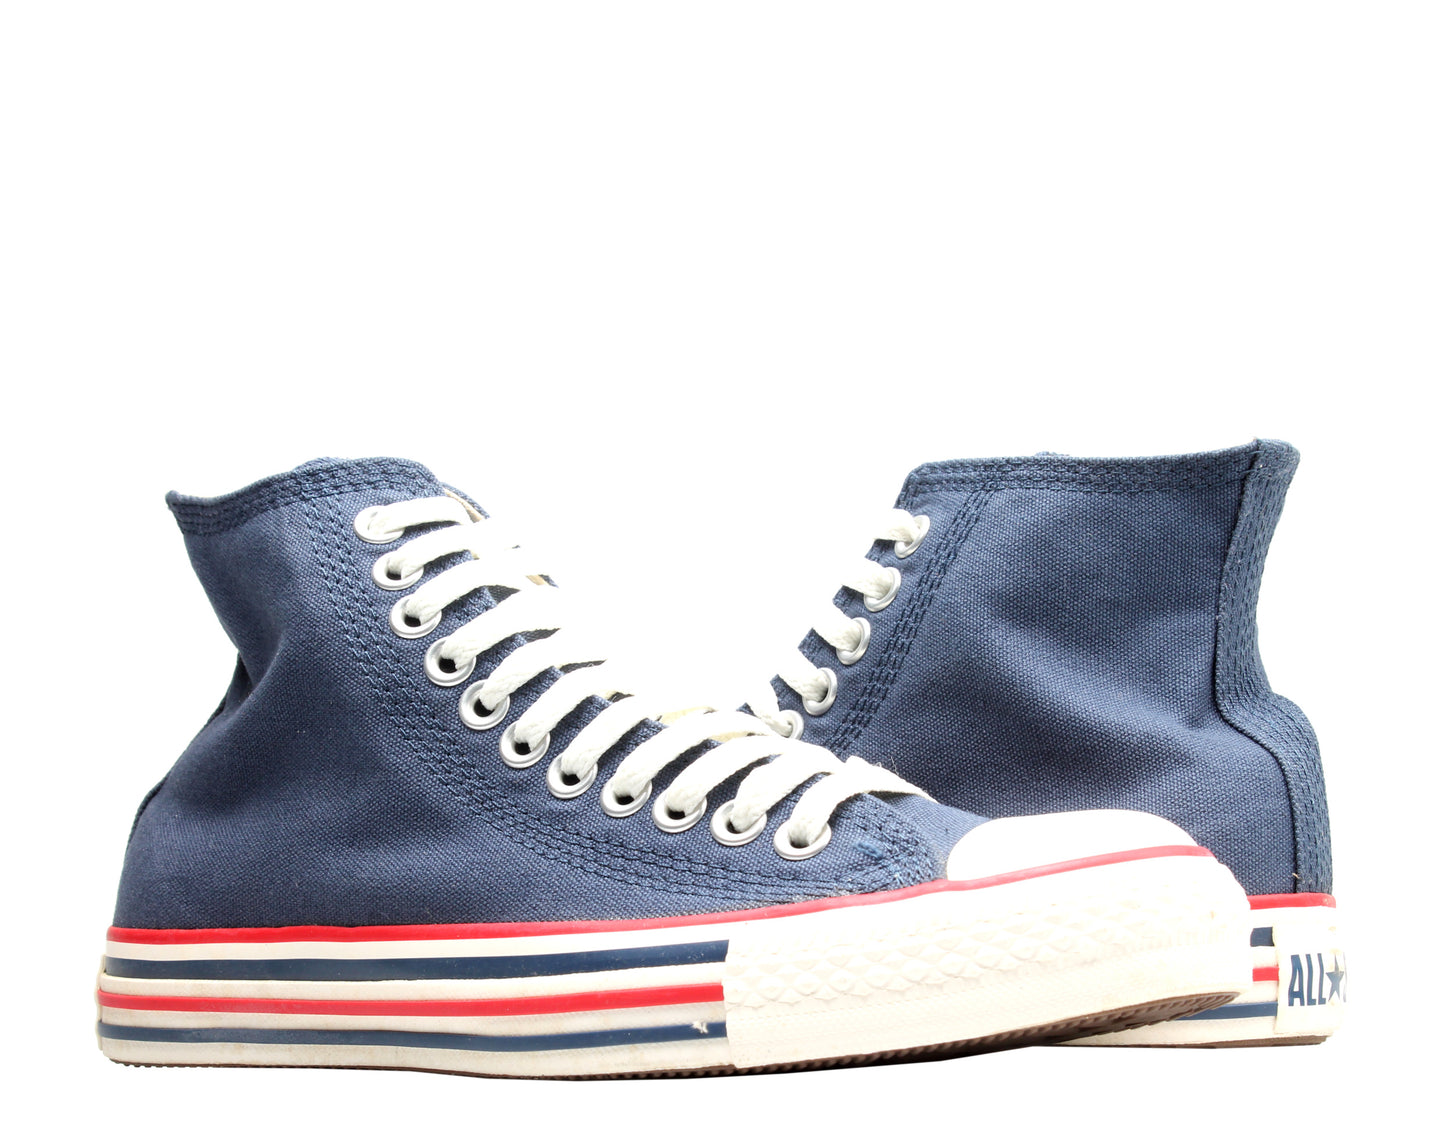 Converse Chuck Taylor All Star Double Details Hi Sneakers